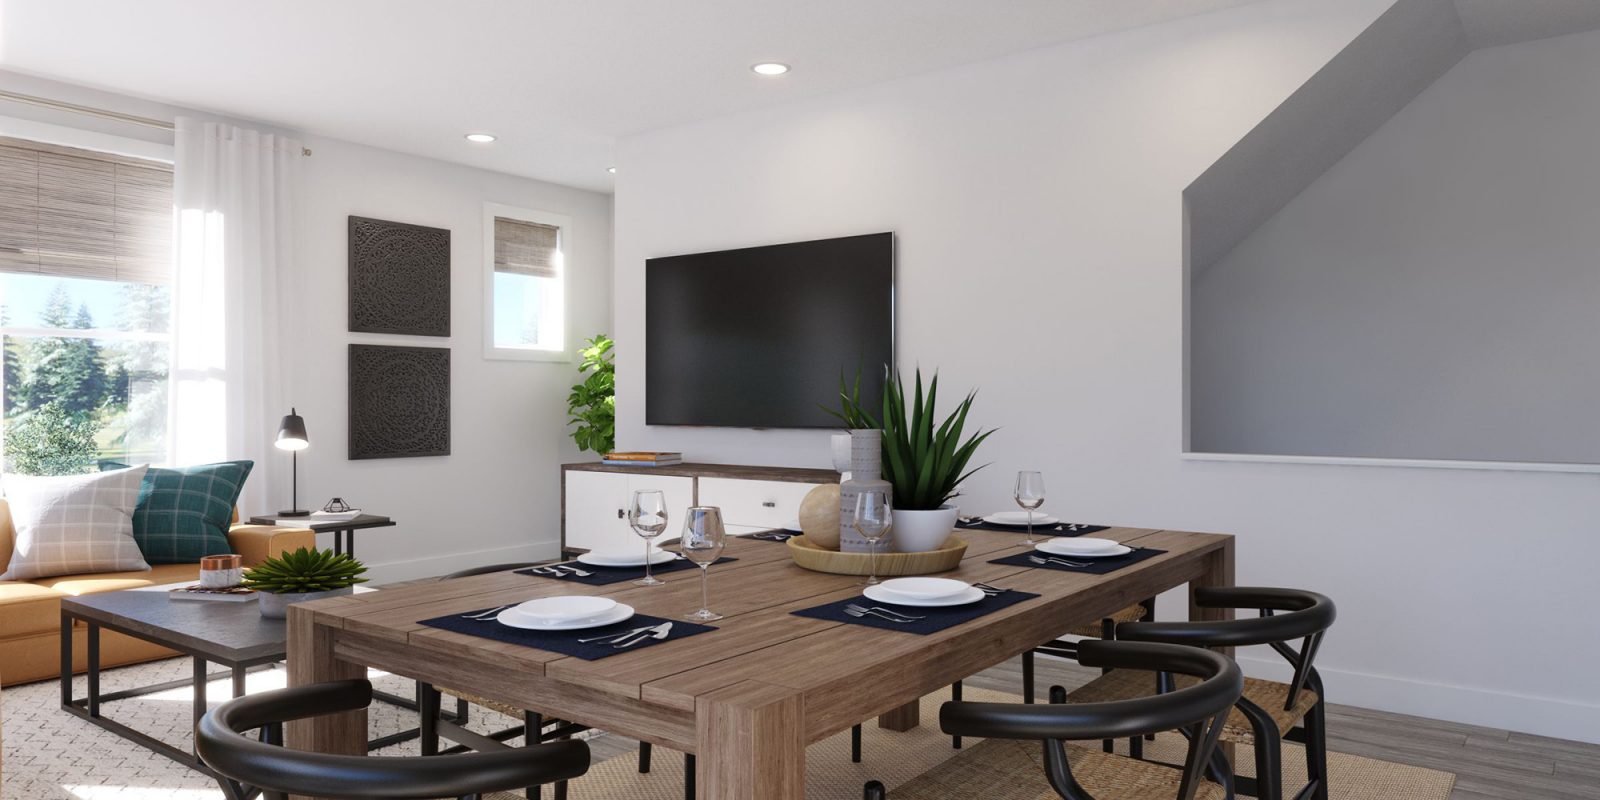 Baseline DoMore Rows: Haven - Dining Nook